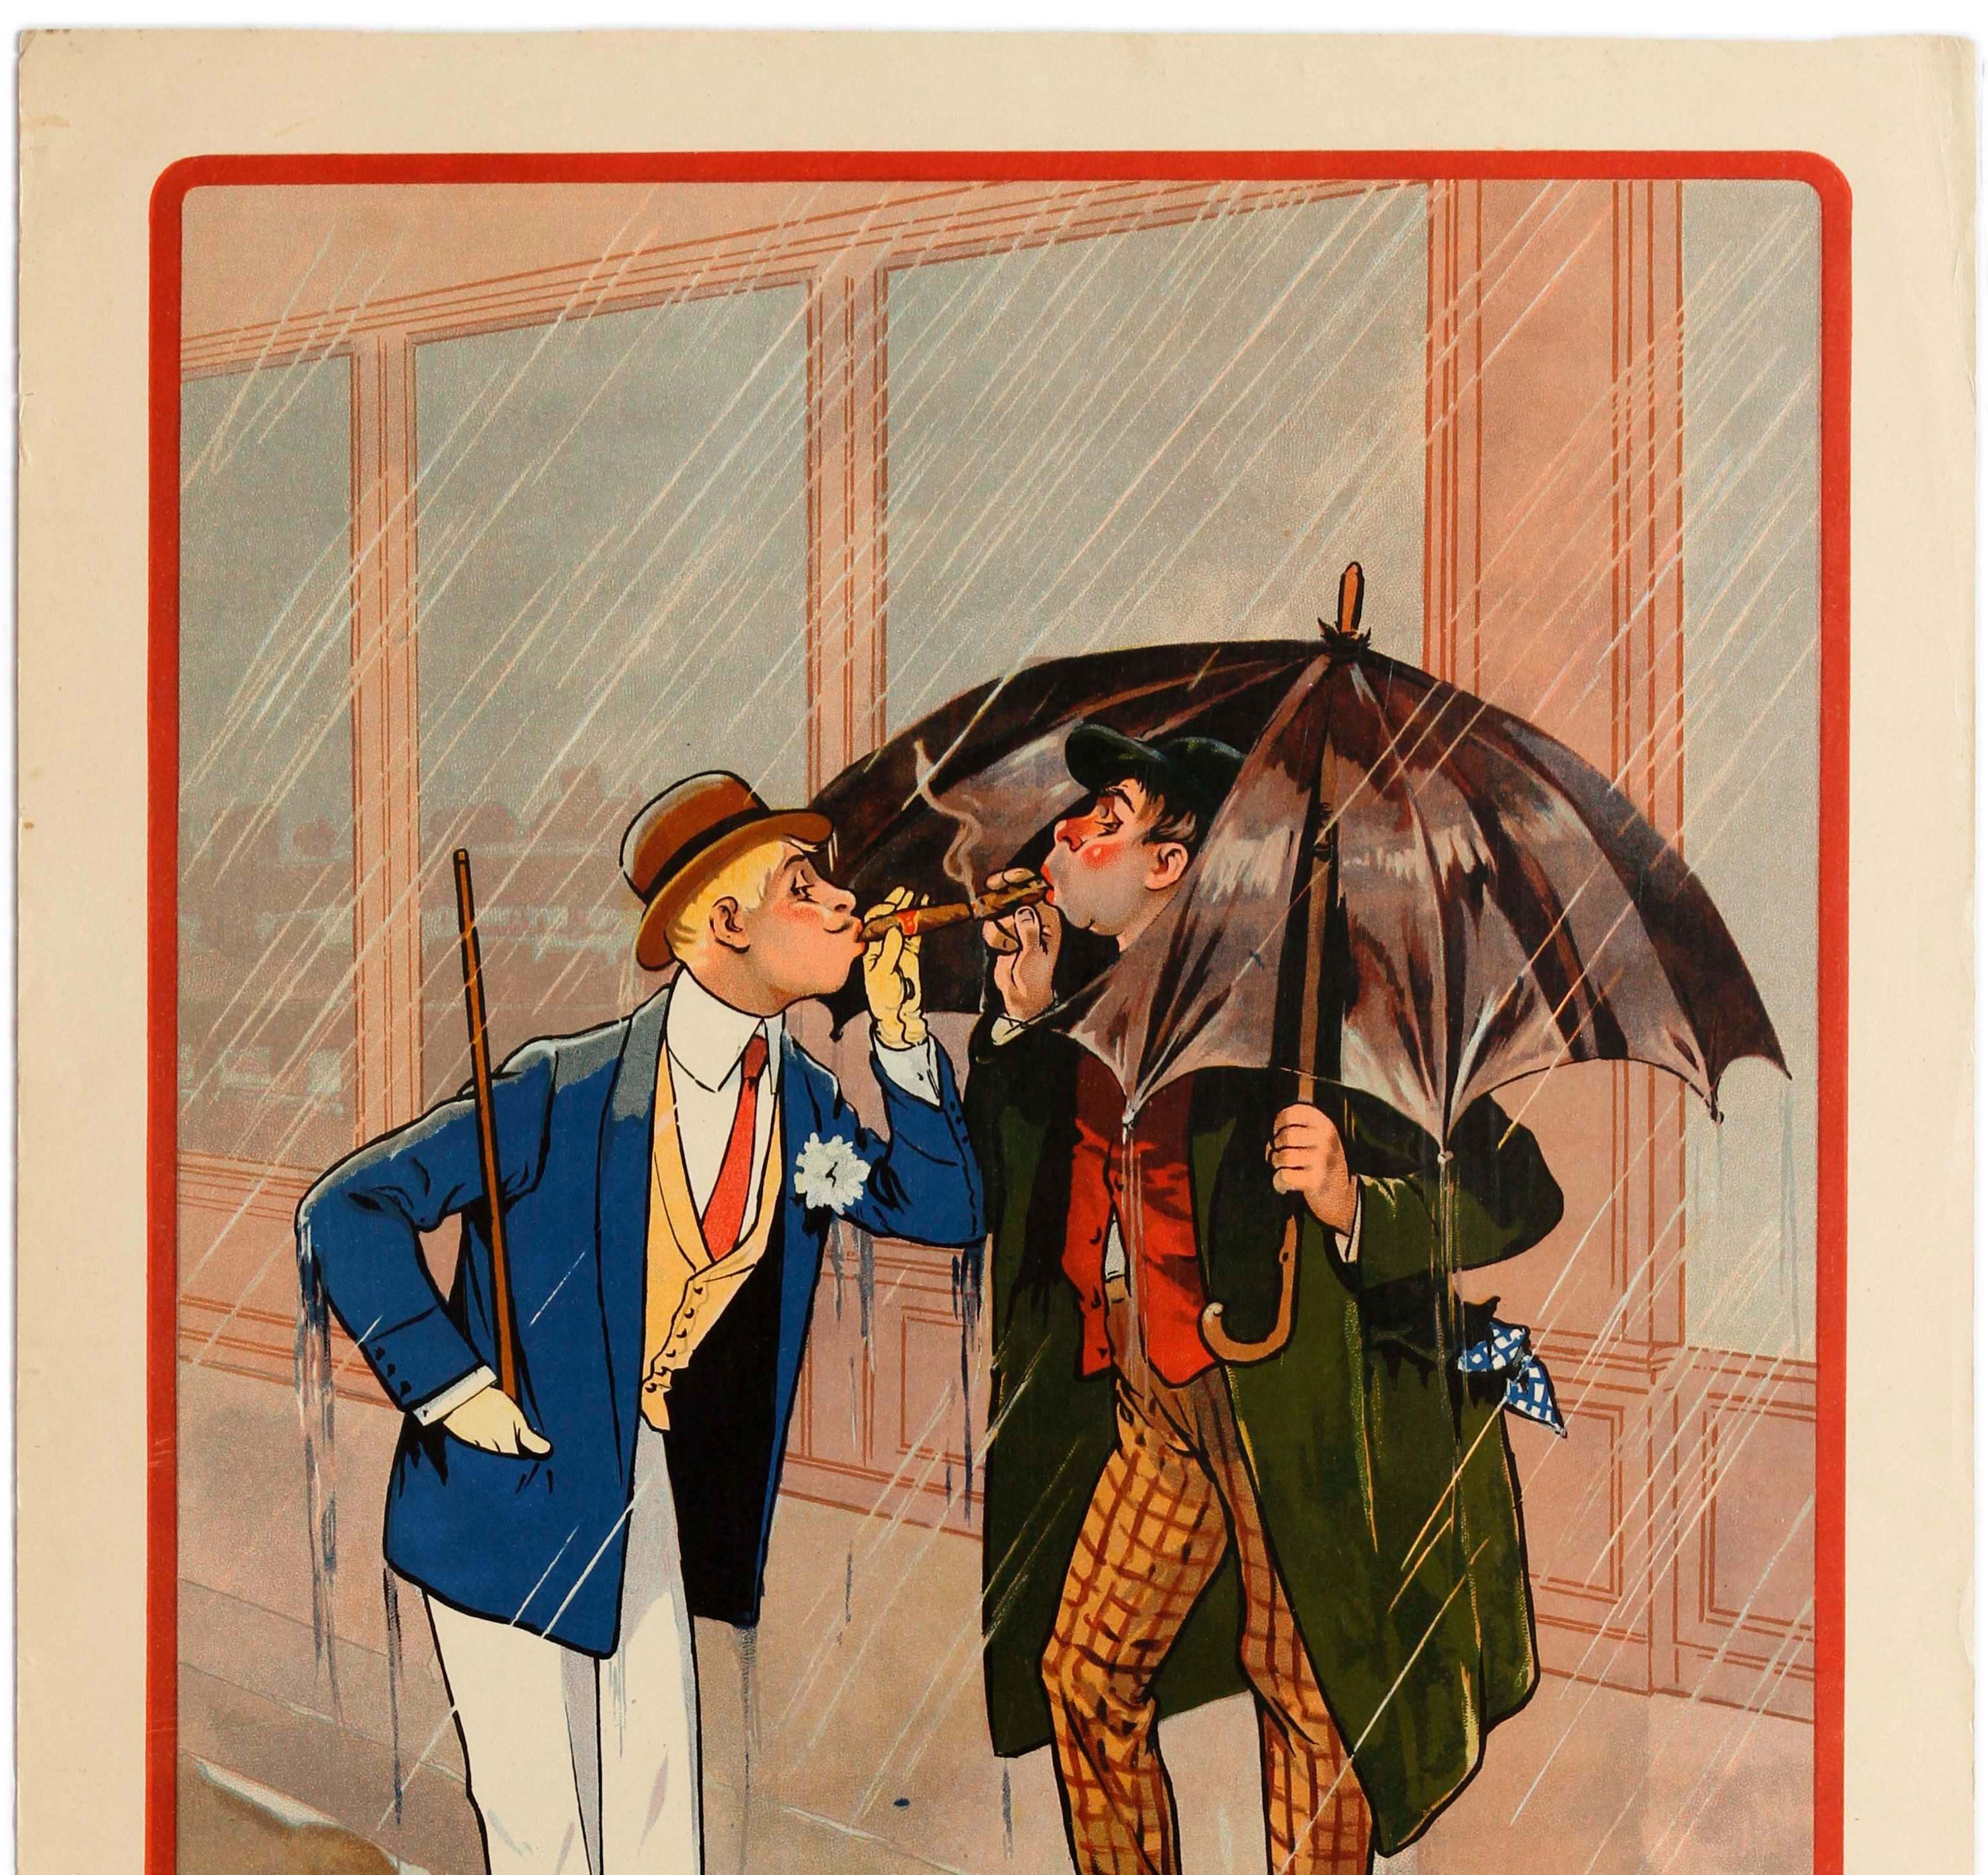 Original vintage smoking poster advertising Cigares Cyrano French cigars featuring a fun and colorful design depicting two men standing in the rain to light and smoke their cigars, a wealthy well dressed man in a suit and hat and holding a cane in